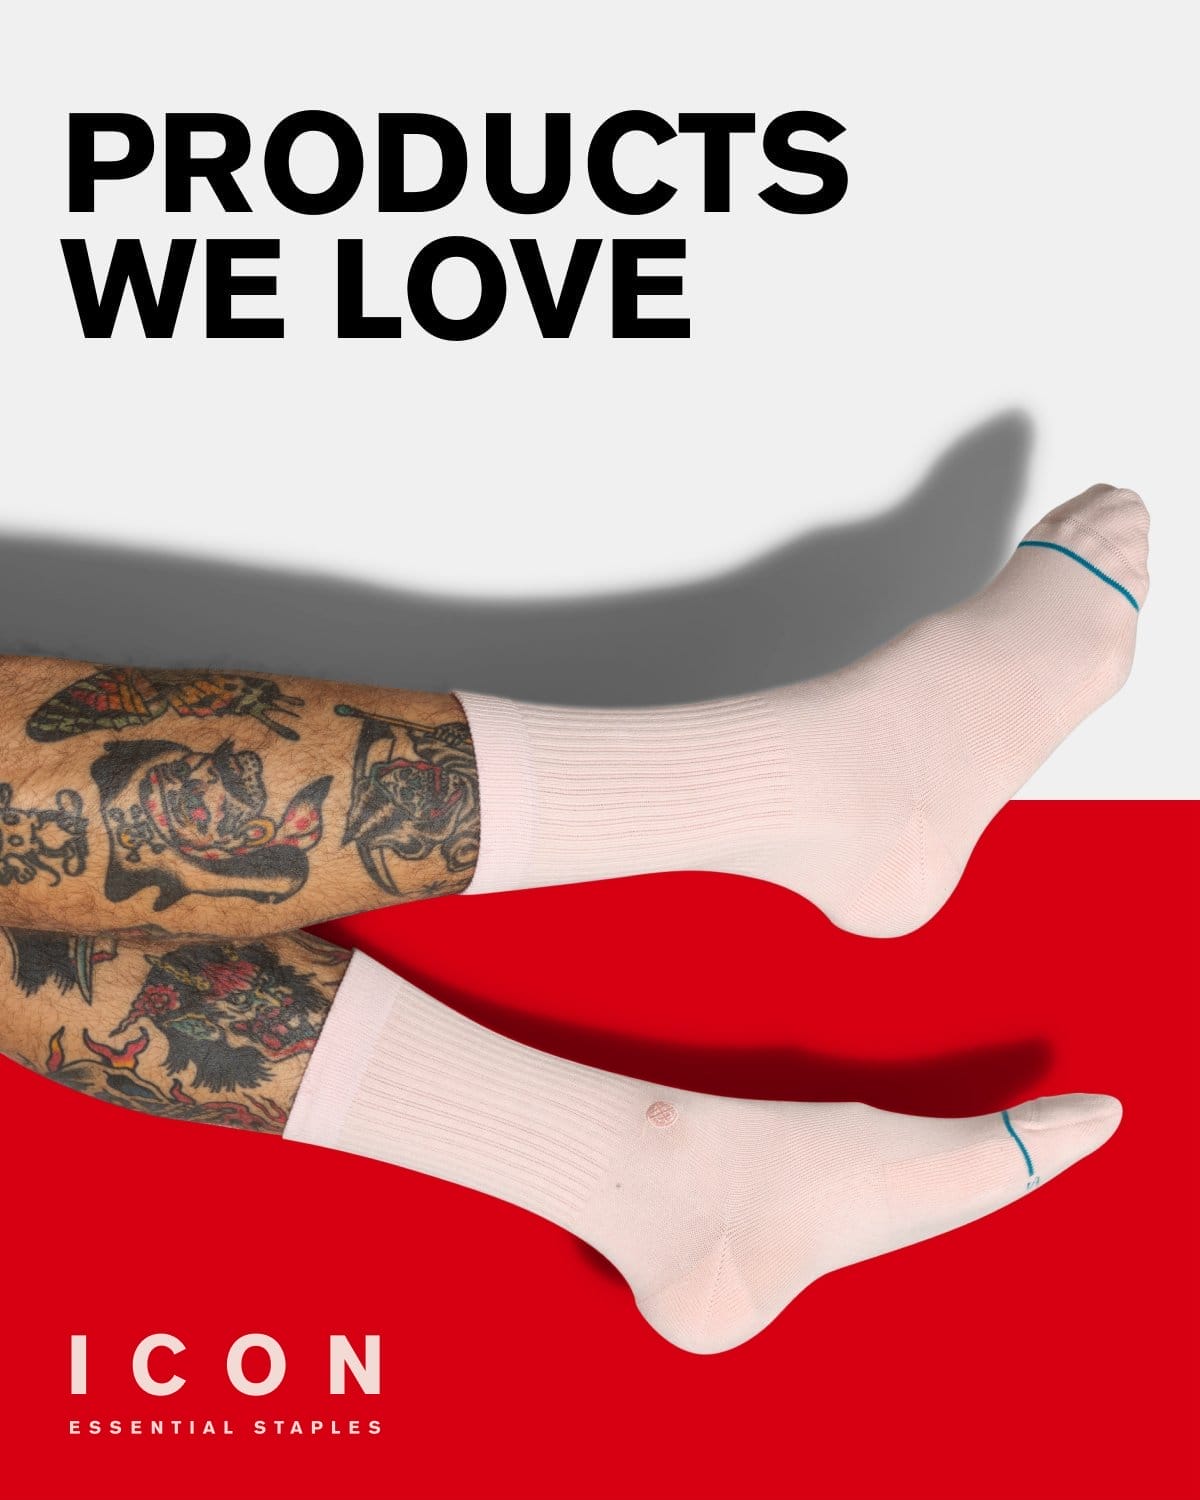 Products We Love